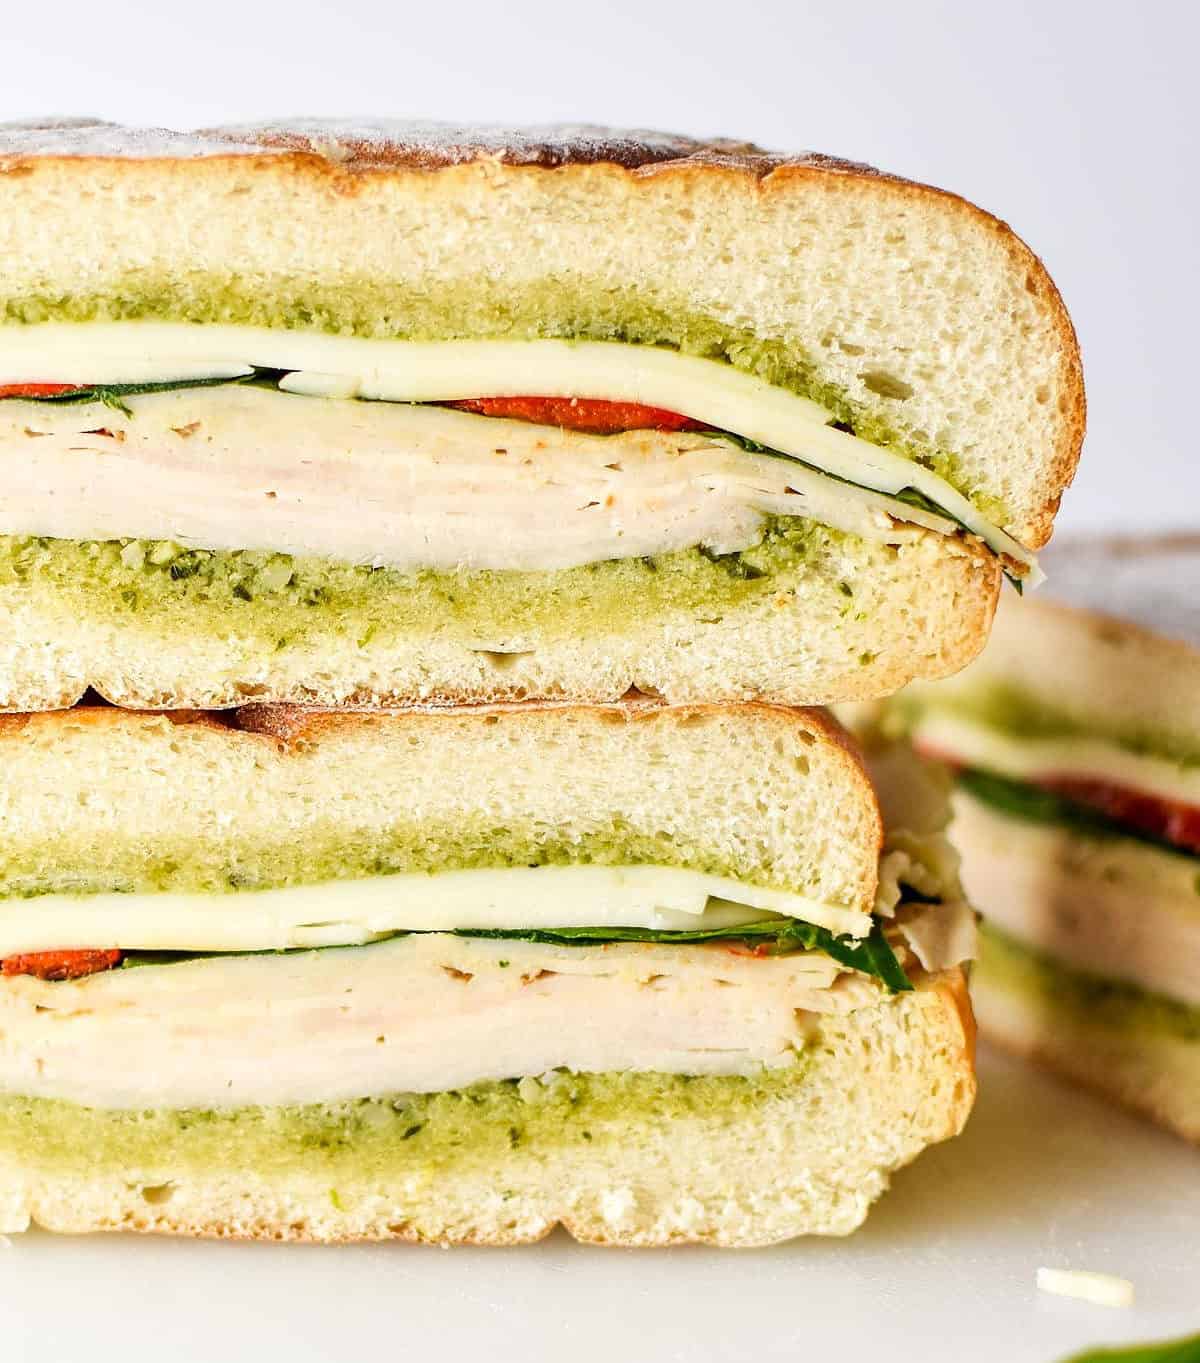  Close your eyes and just listen to the crunch and sizzle of this melted mozzarella, pesto-slathered sandwich.